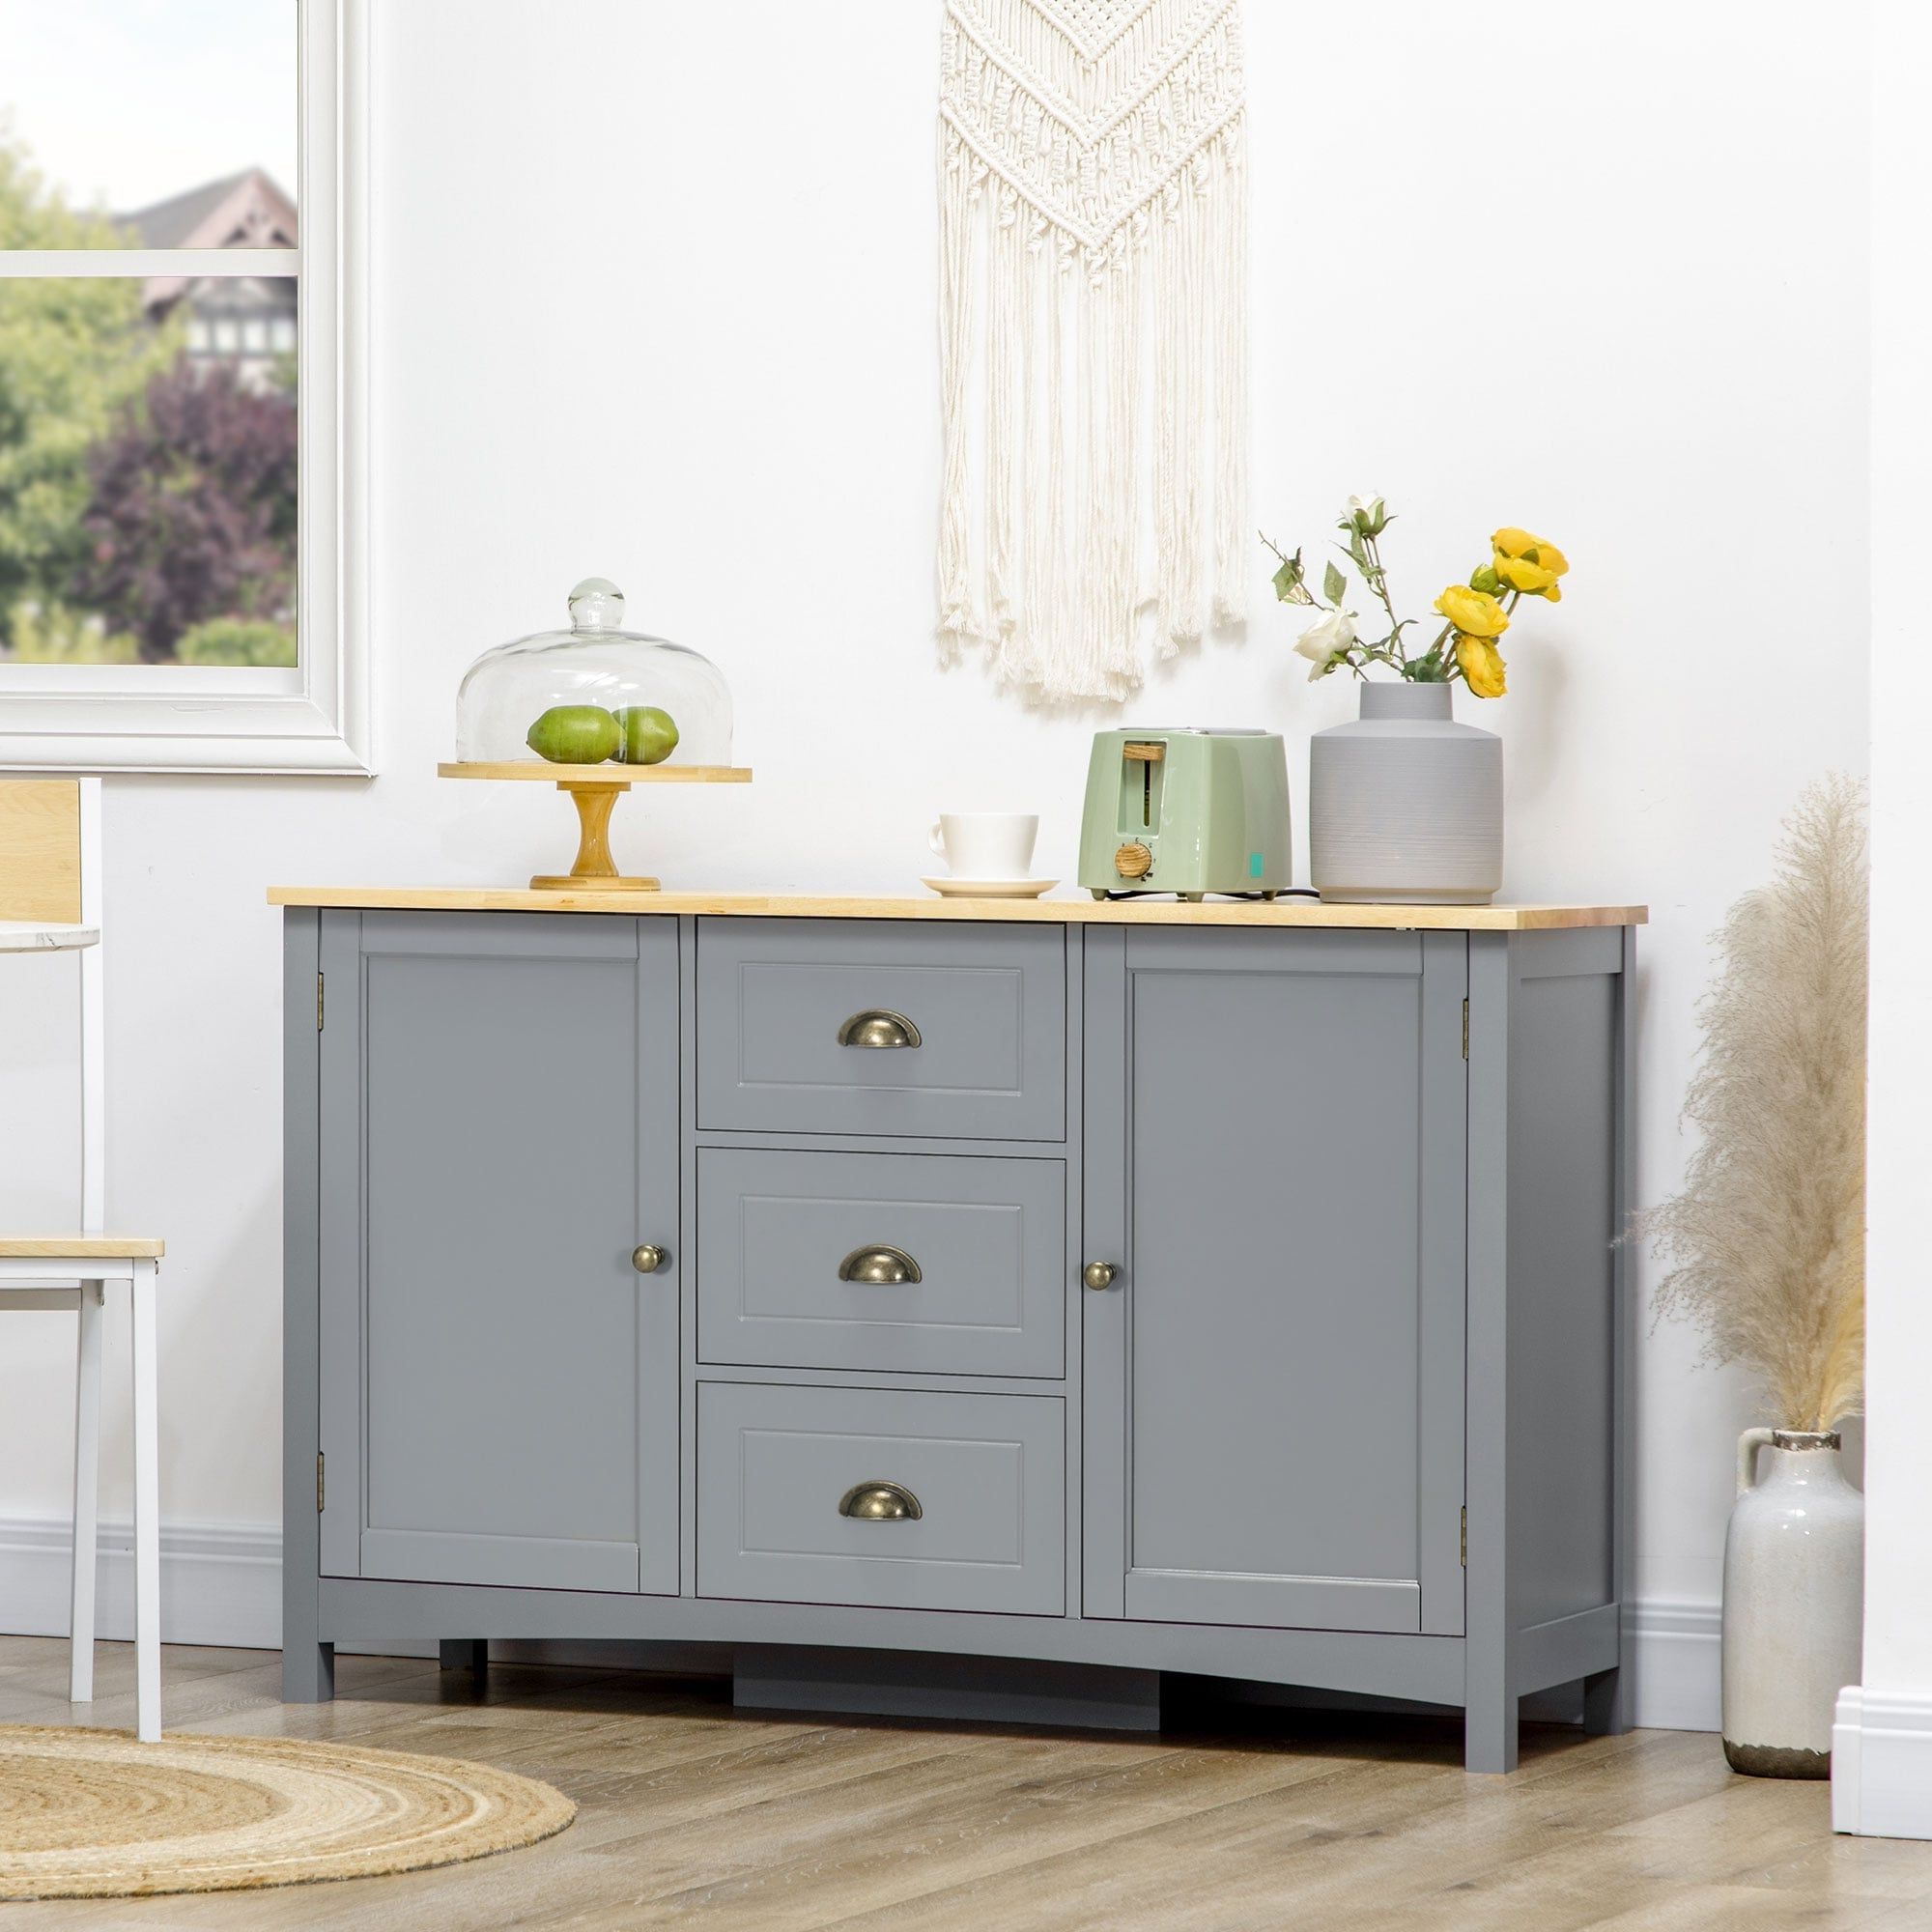 Homcom Sideboard Buffet Cabinet, Retro Kitchen Cabinet, Coffee Bar Cabinet  With Rubber Wood Top, Drawers, Entryway, Gray – Bed Bath & Beyond – 38858360 Inside Sideboards With Rubberwood Top (View 4 of 20)